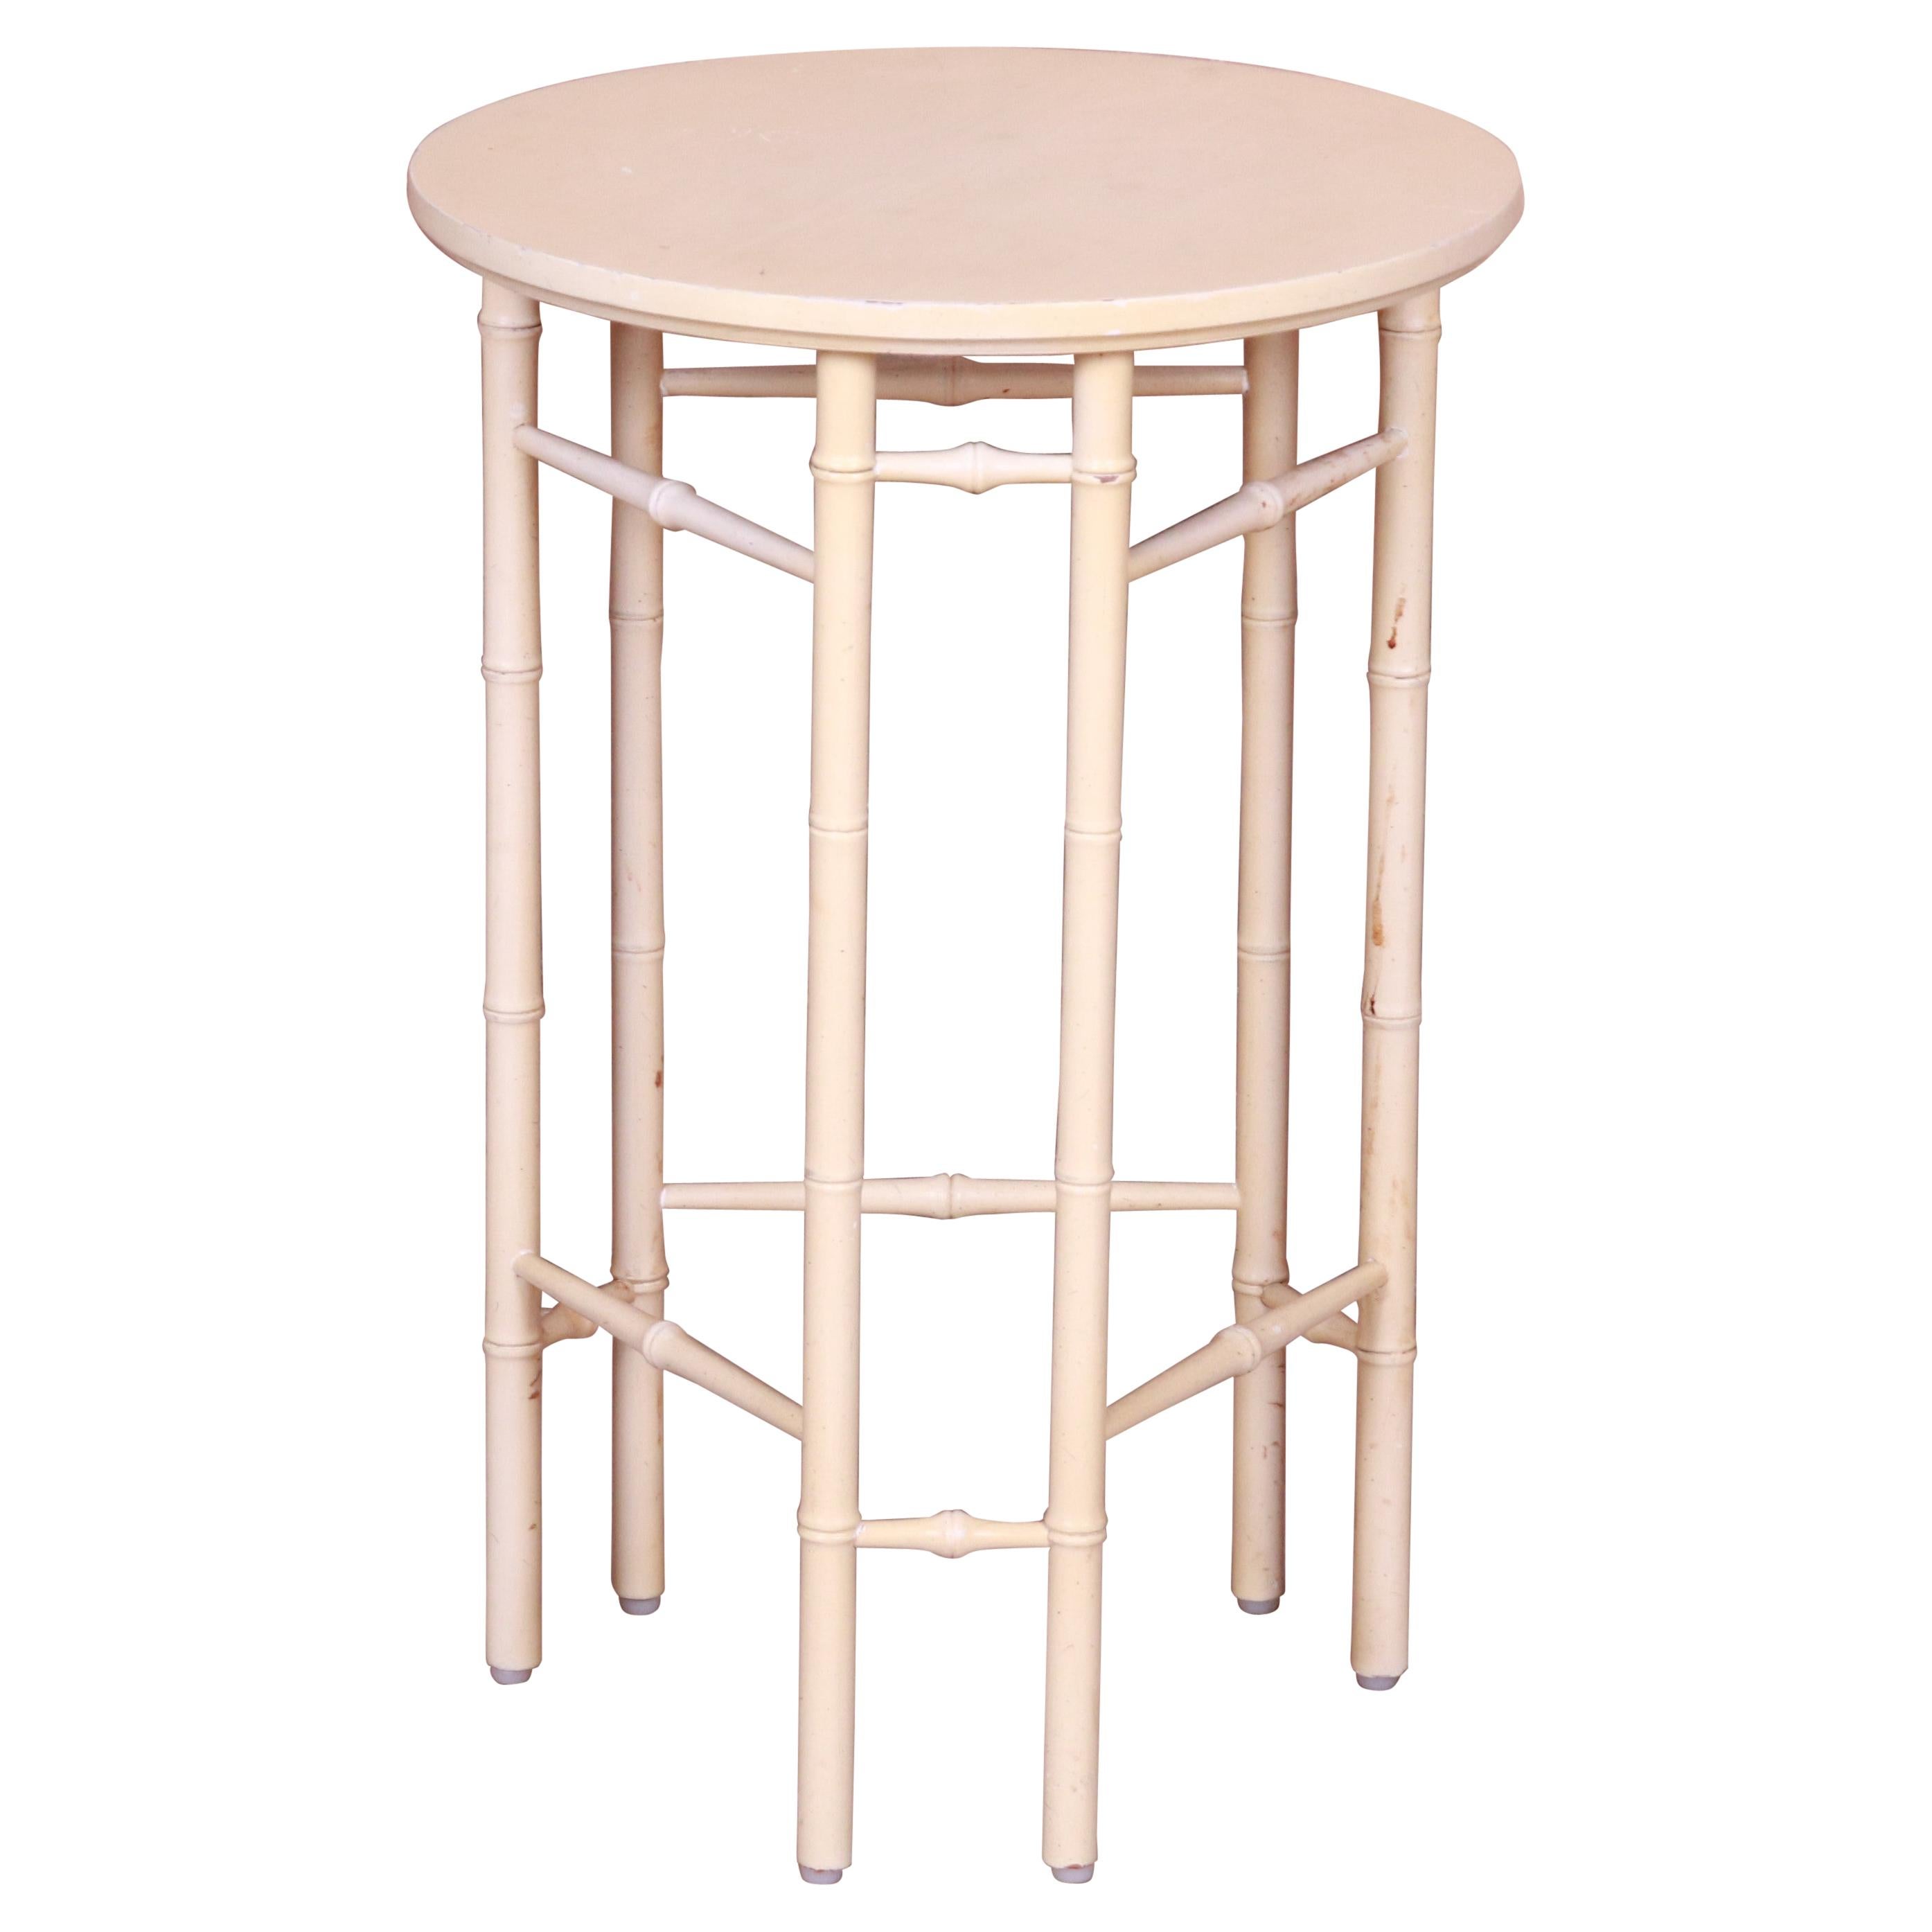 Baker Furniture Hollywood Regency Faux Bamboo Cream Lacquered Side Table, 1960s